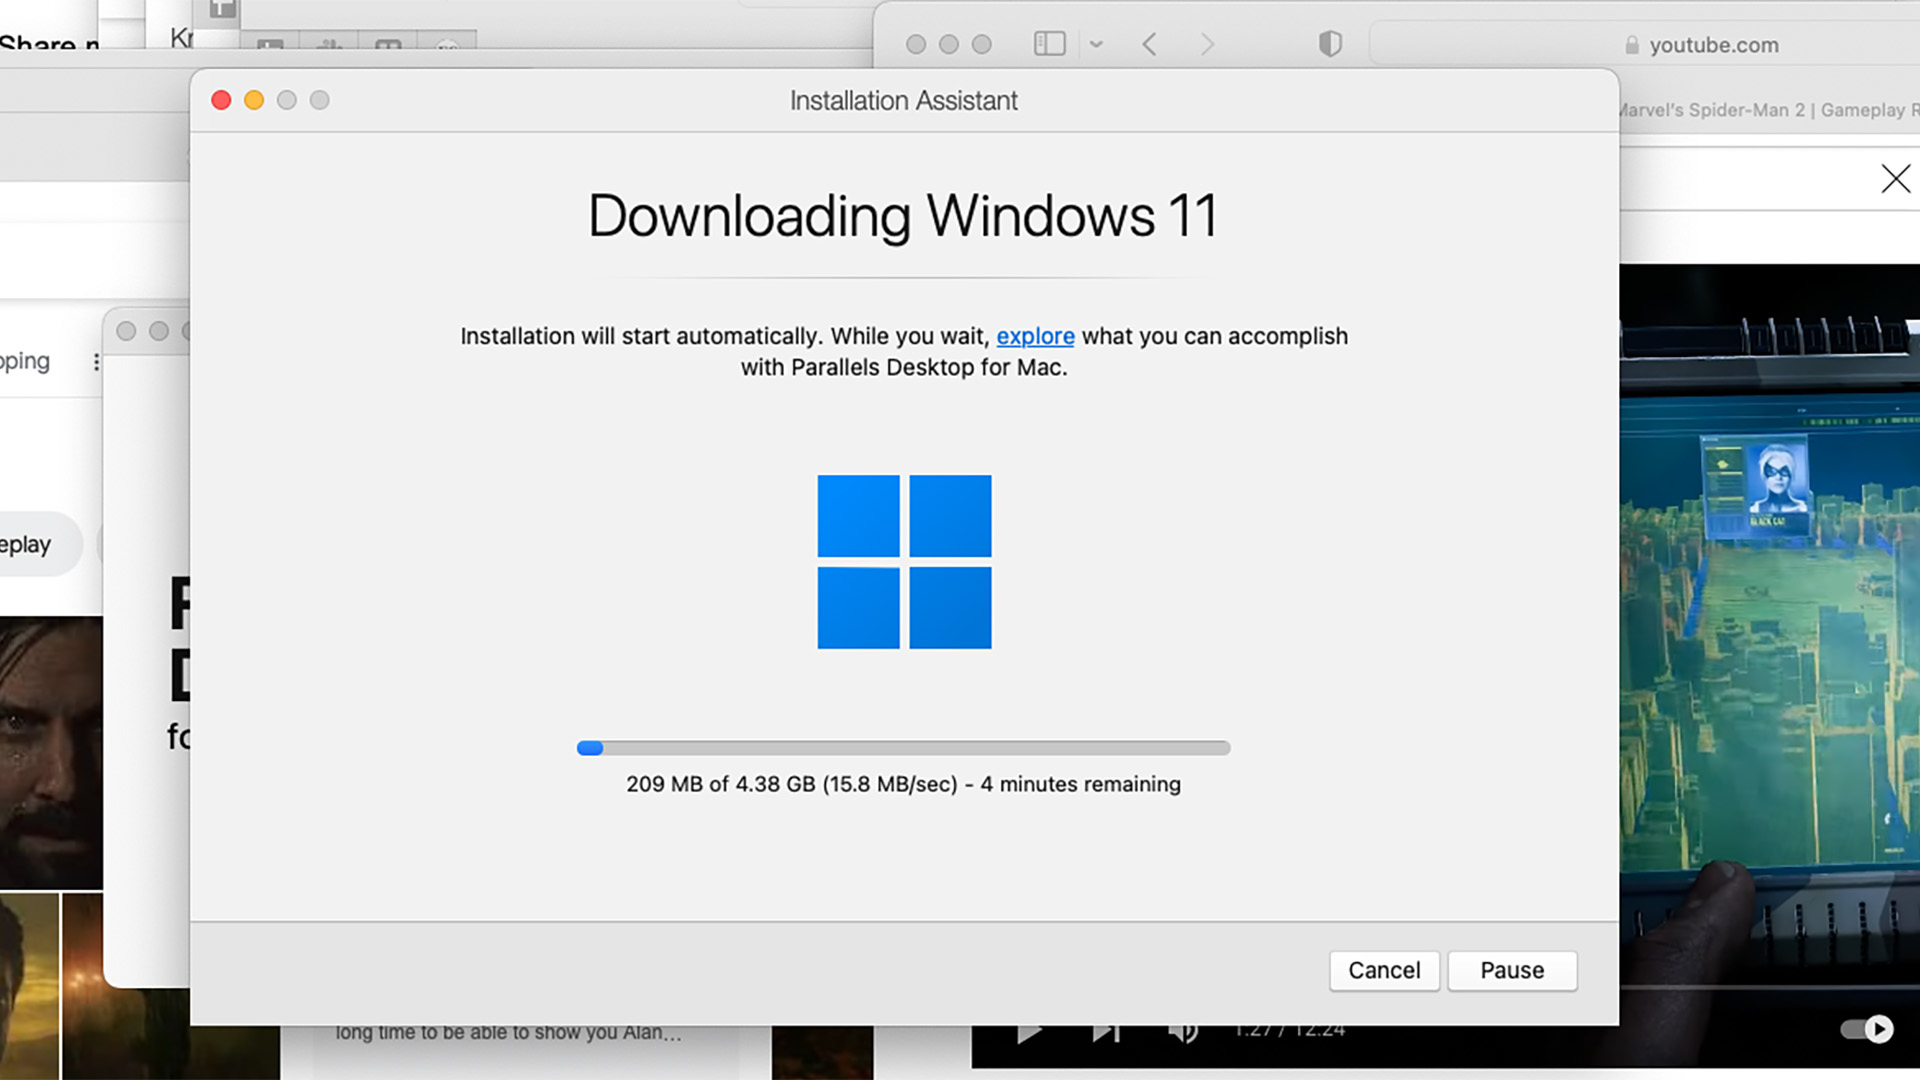 Windows 11 on Mac with Parallels